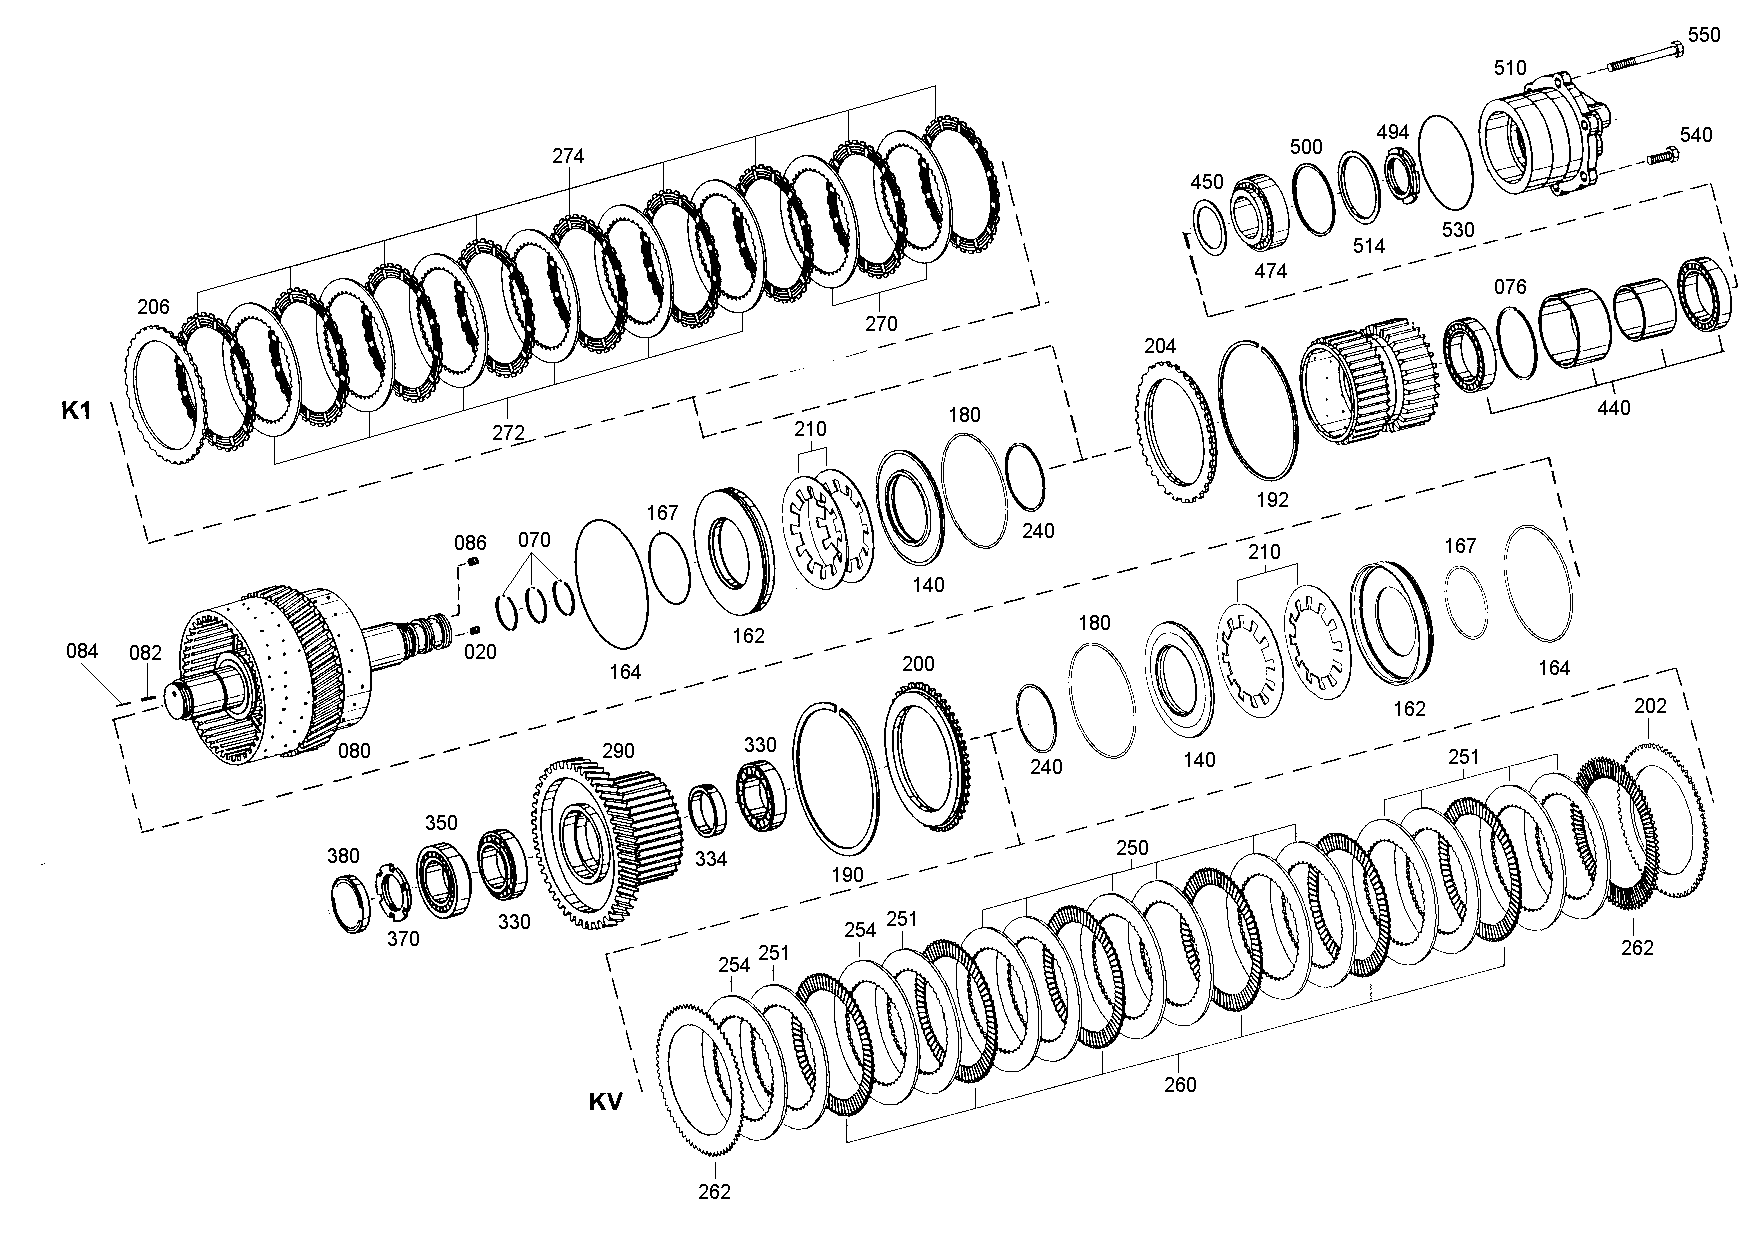 drawing for MOXY TRUCKS AS 504849 - WASHER (figure 3)